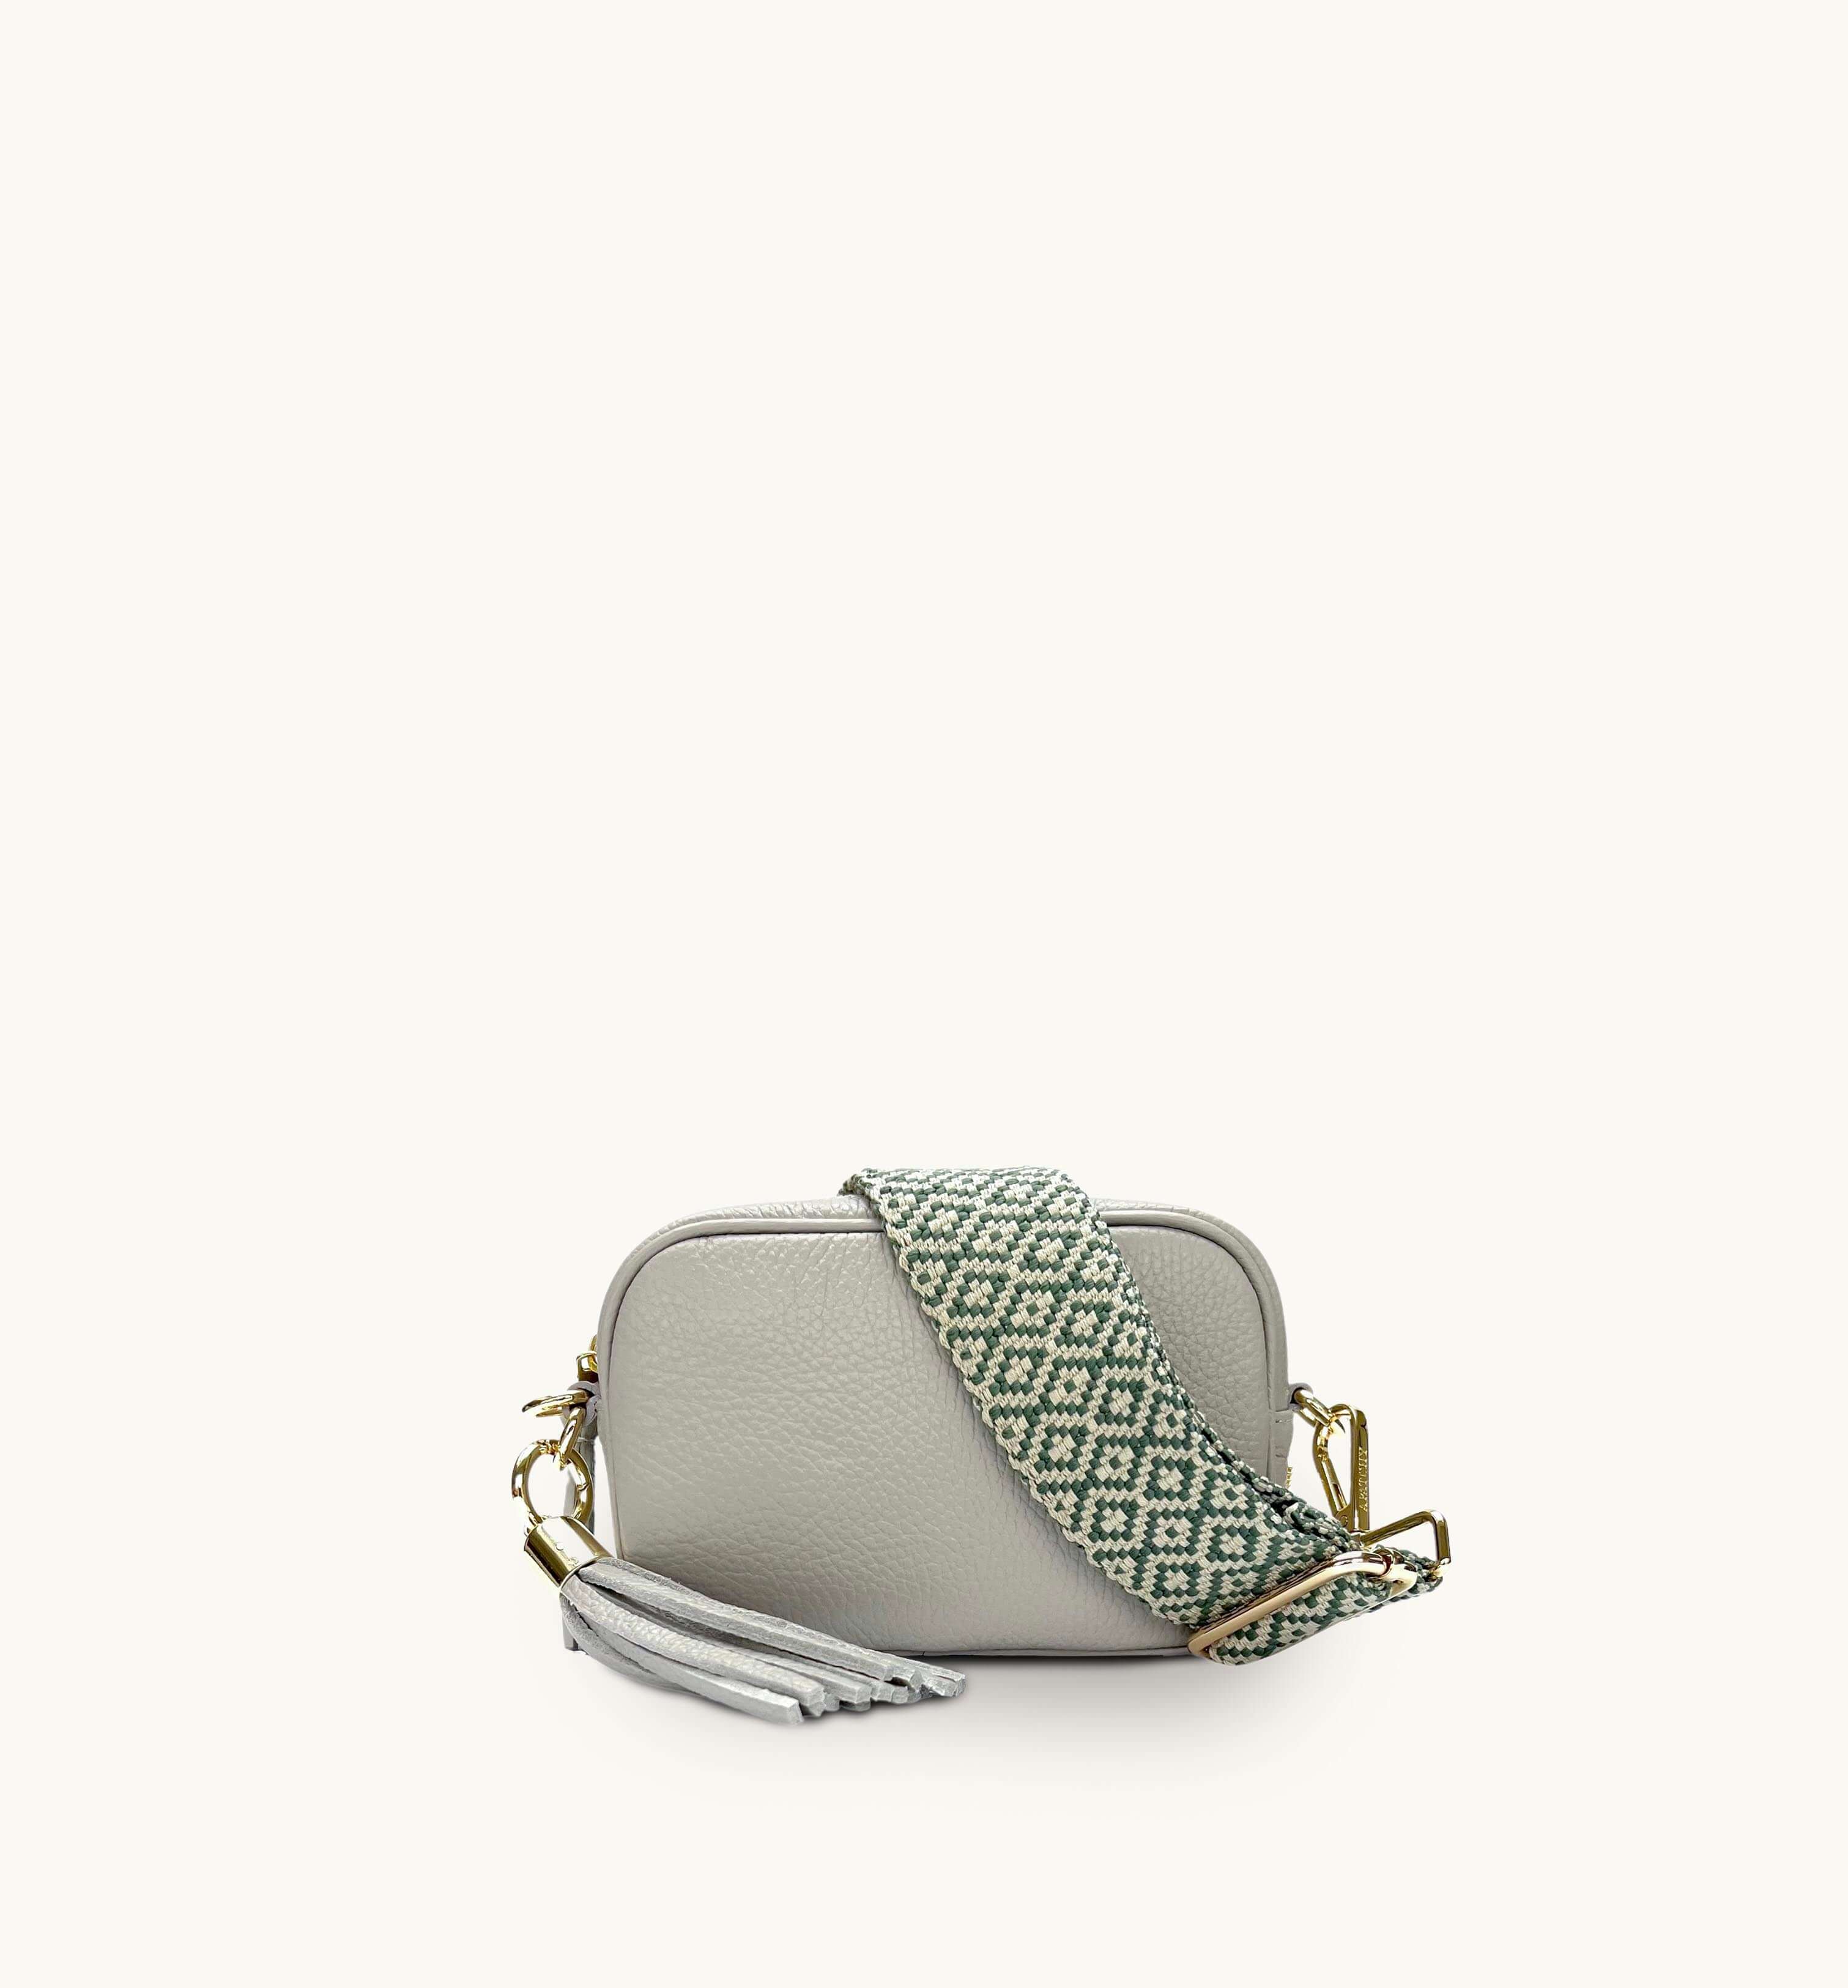 Apatchy Mini Light Grey Leather Phone Bag With Pistachio Cross-Stitch Strap